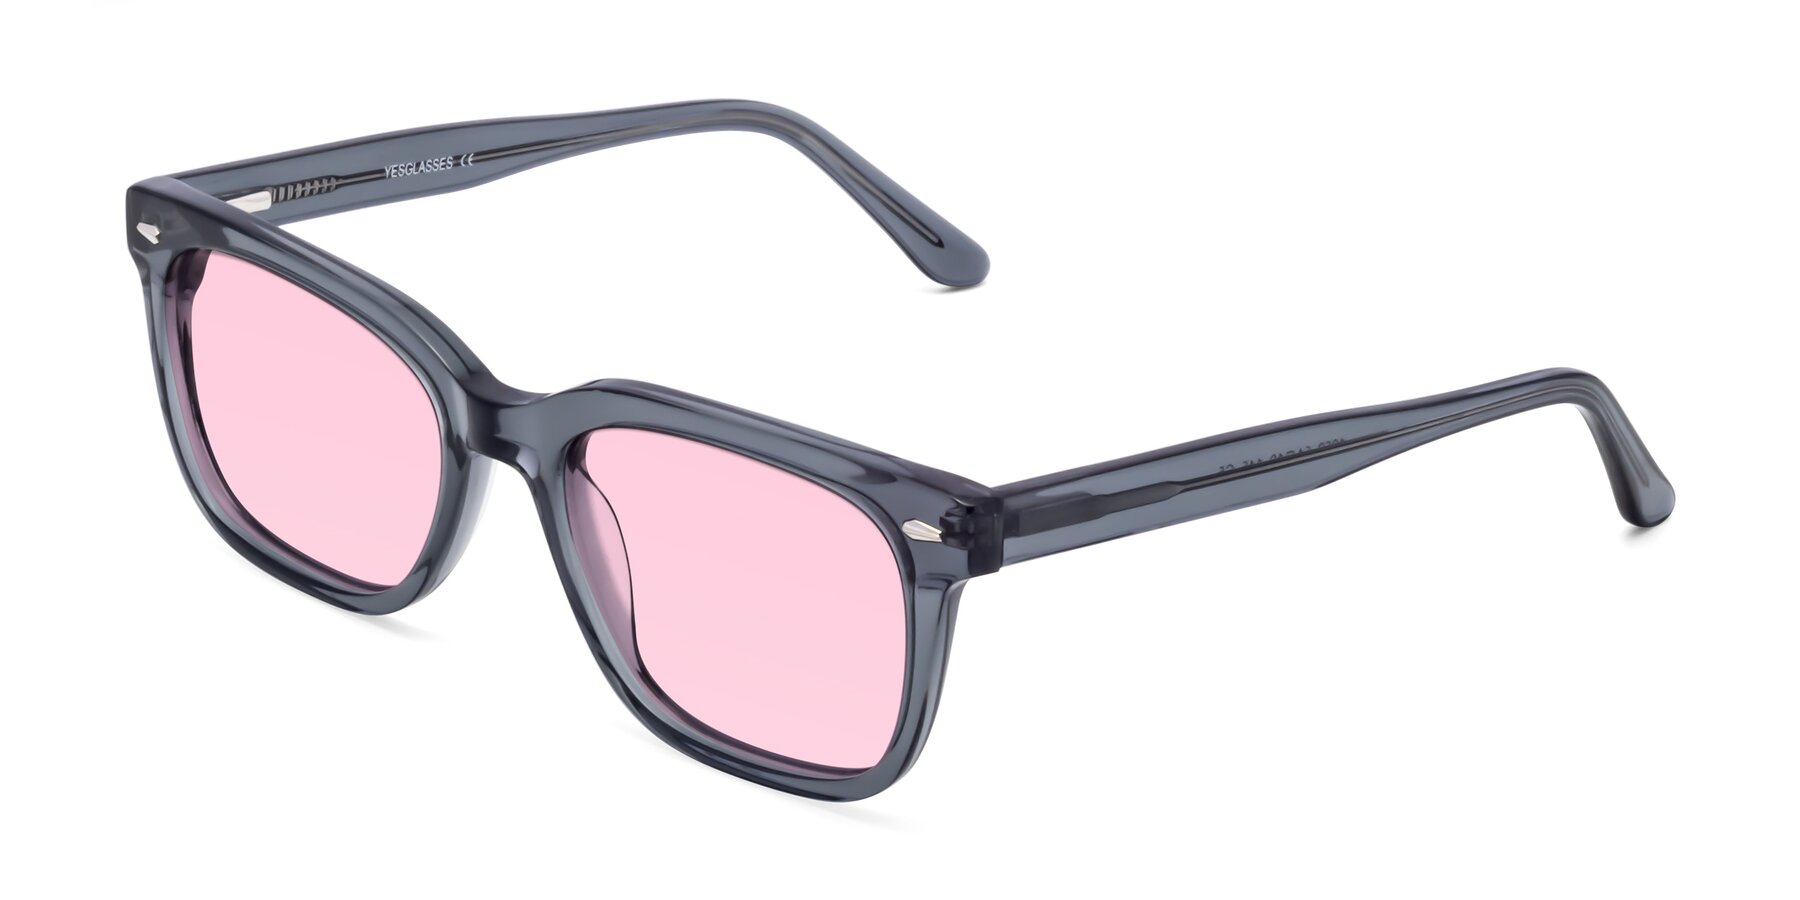 Angle of 1052 in Transparent Gray with Light Pink Tinted Lenses